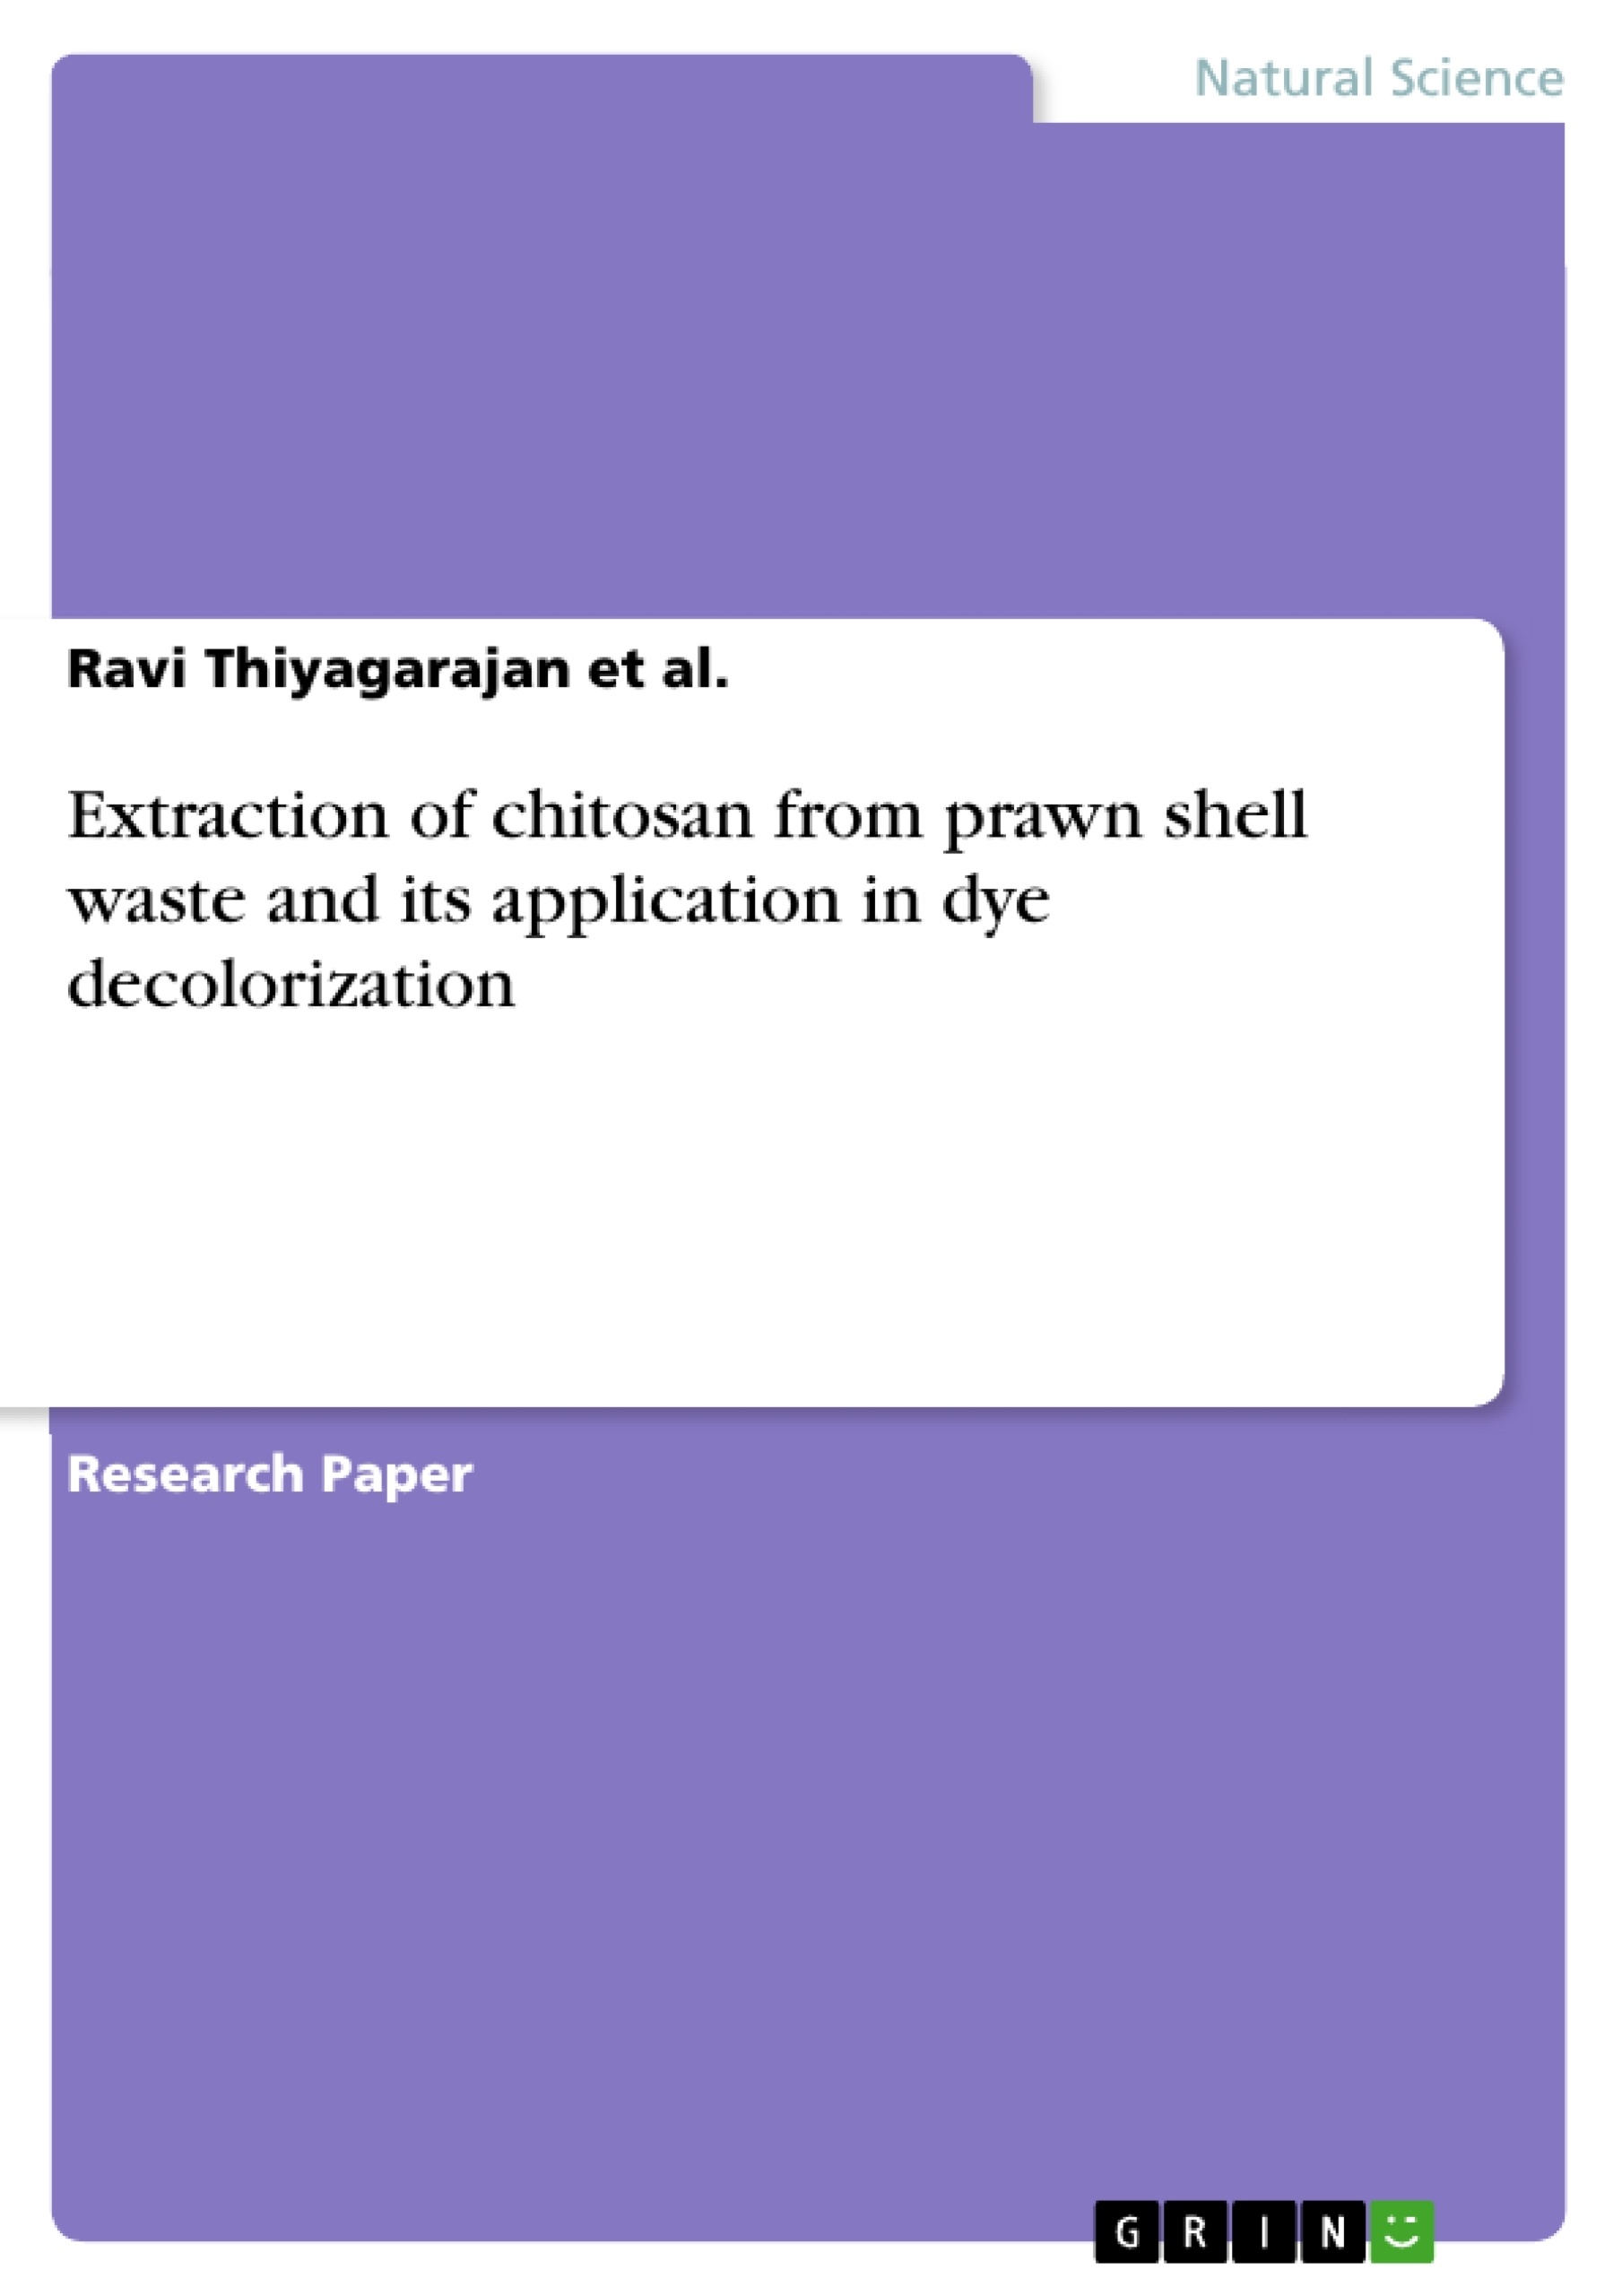 Título: Extraction of chitosan from prawn shell waste and its application in dye decolorization